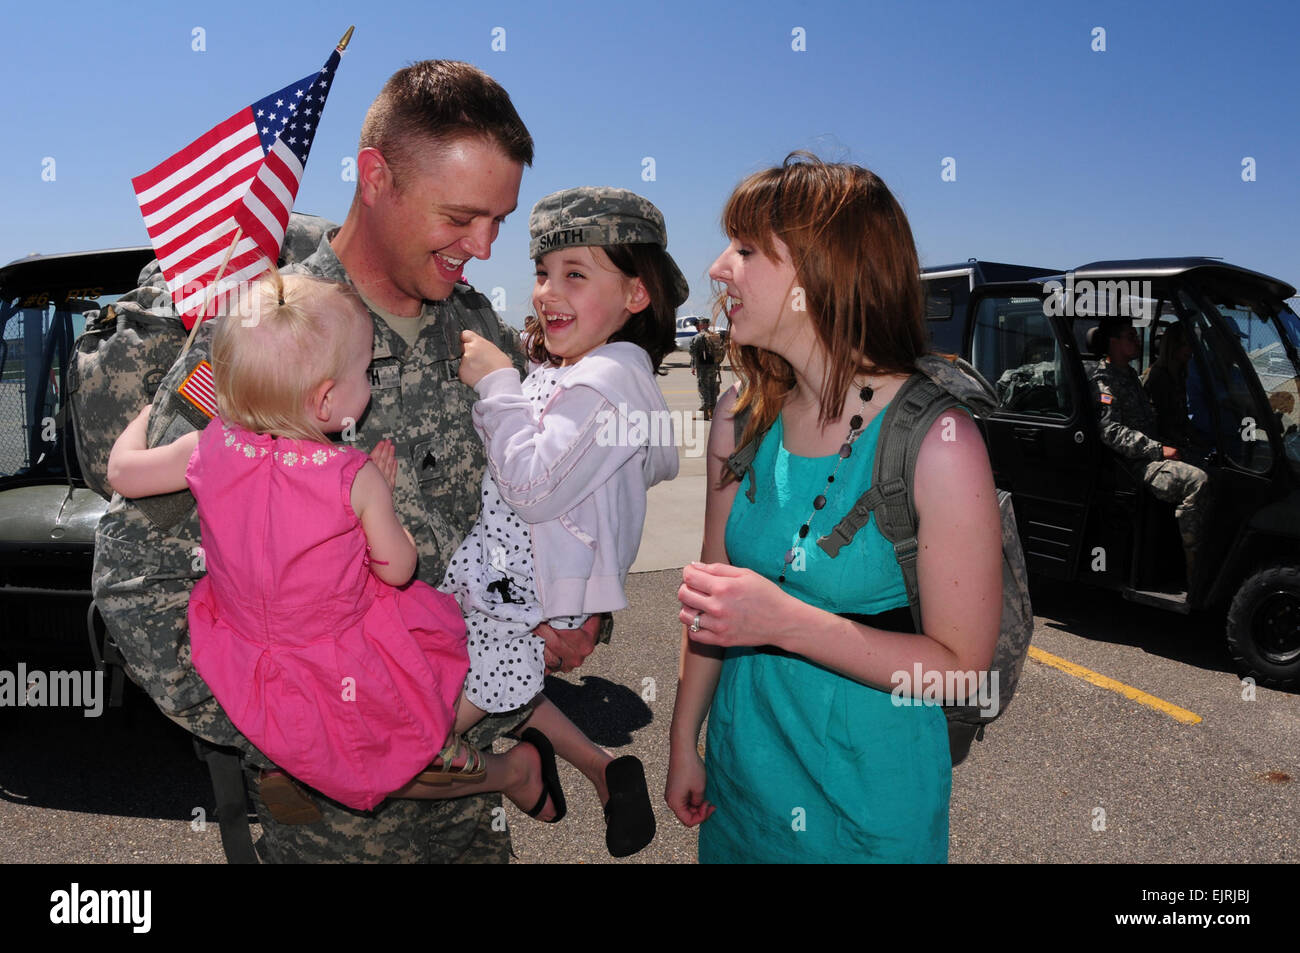 U.S. Army Sgt. Michael Smith is greeted May 14, 2010, at  Hector International Airport in Fargo, N.D., upon returning from a peacekeeping deployment to Kosovo.  Senior Master Sgt. David H. Lipp, Stock Photo